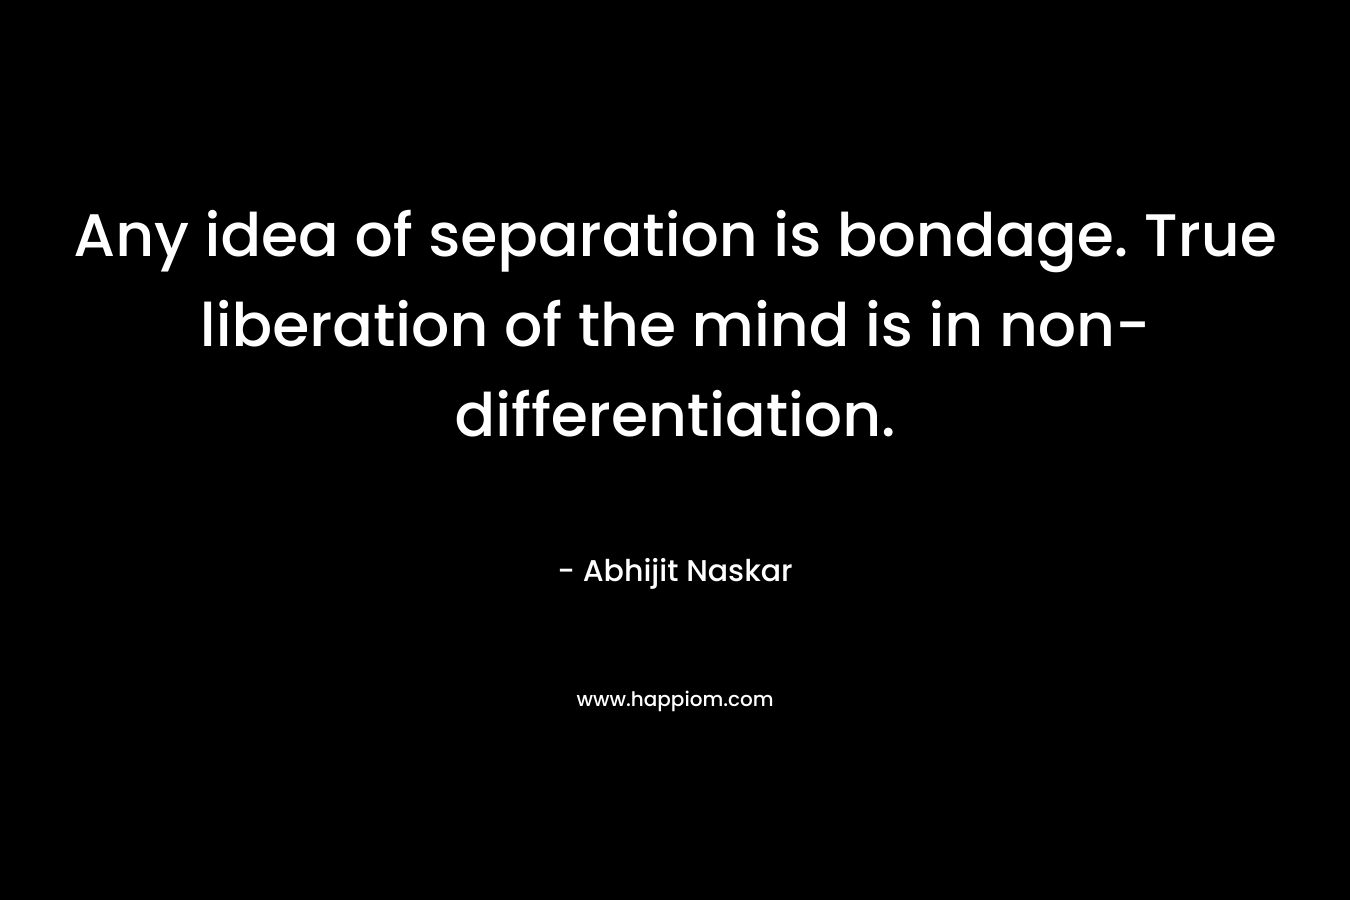 Any idea of separation is bondage. True liberation of the mind is in non-differentiation.